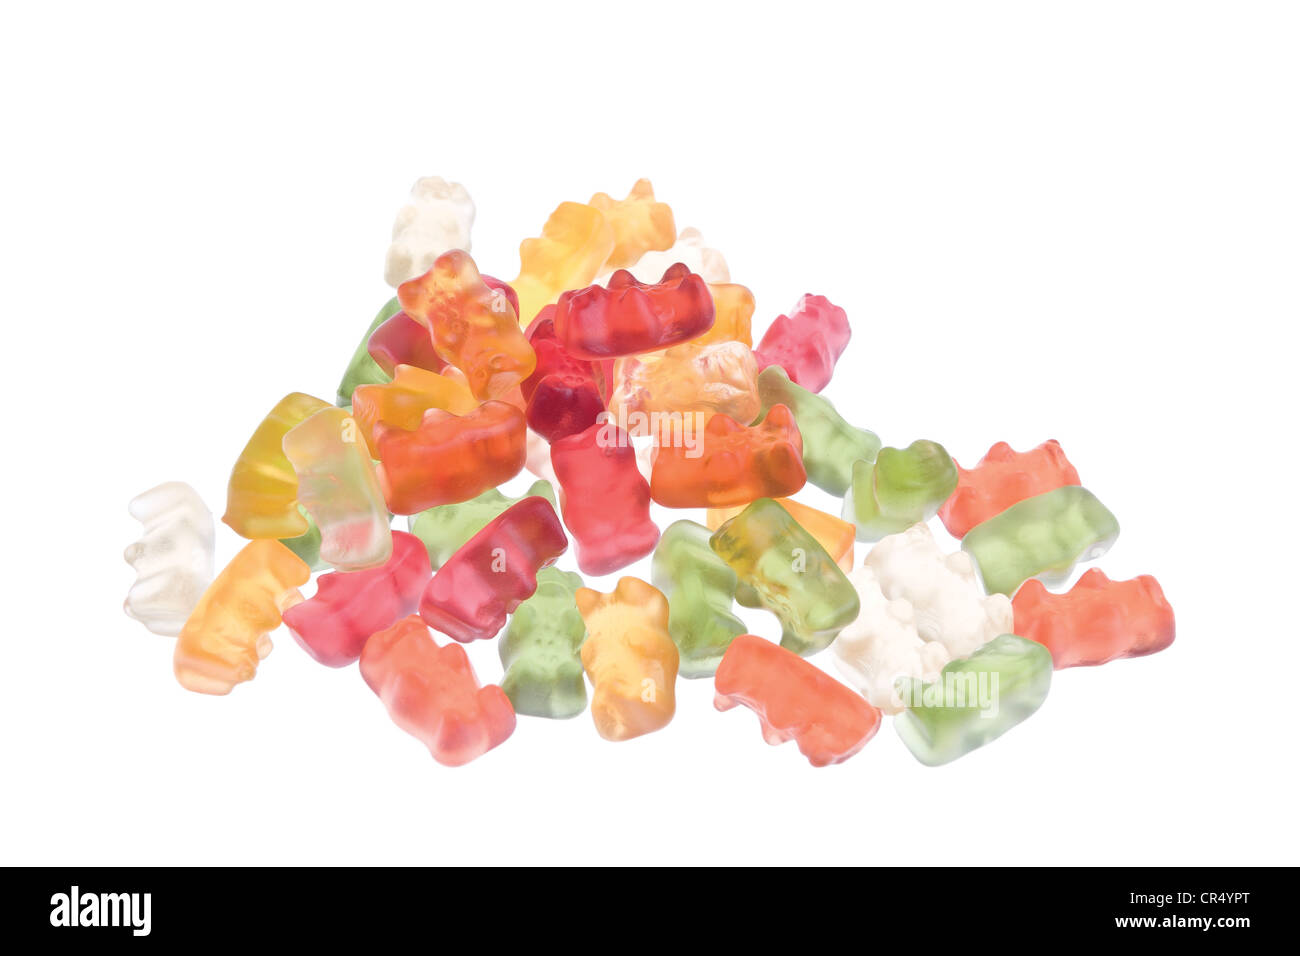 Jelly beans on white background Stock Photo